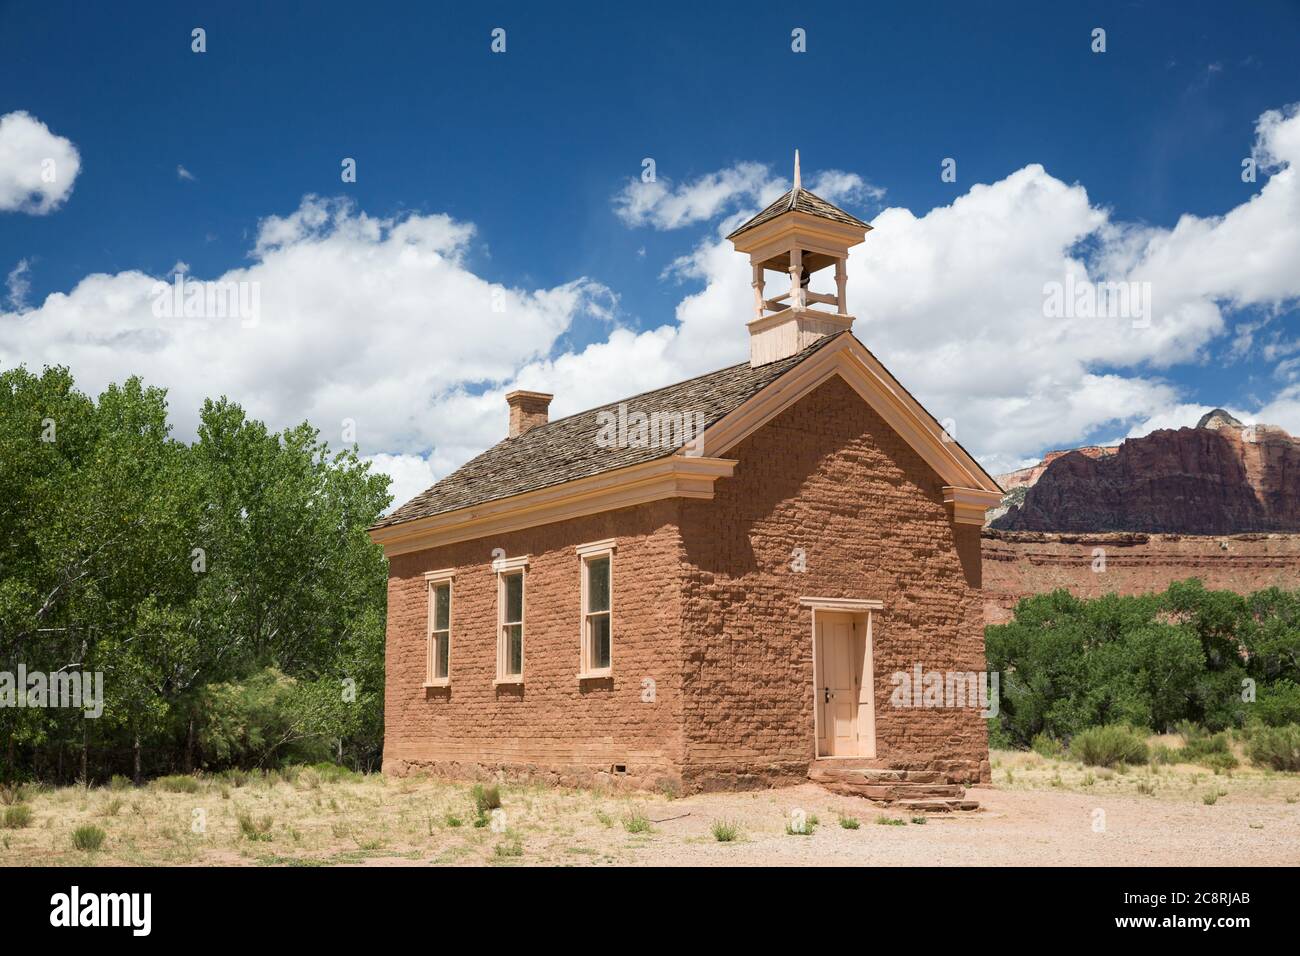 A small community school house leftover from the late 1800's in a small desert community, now an abandoned ghost town. Stock Photo